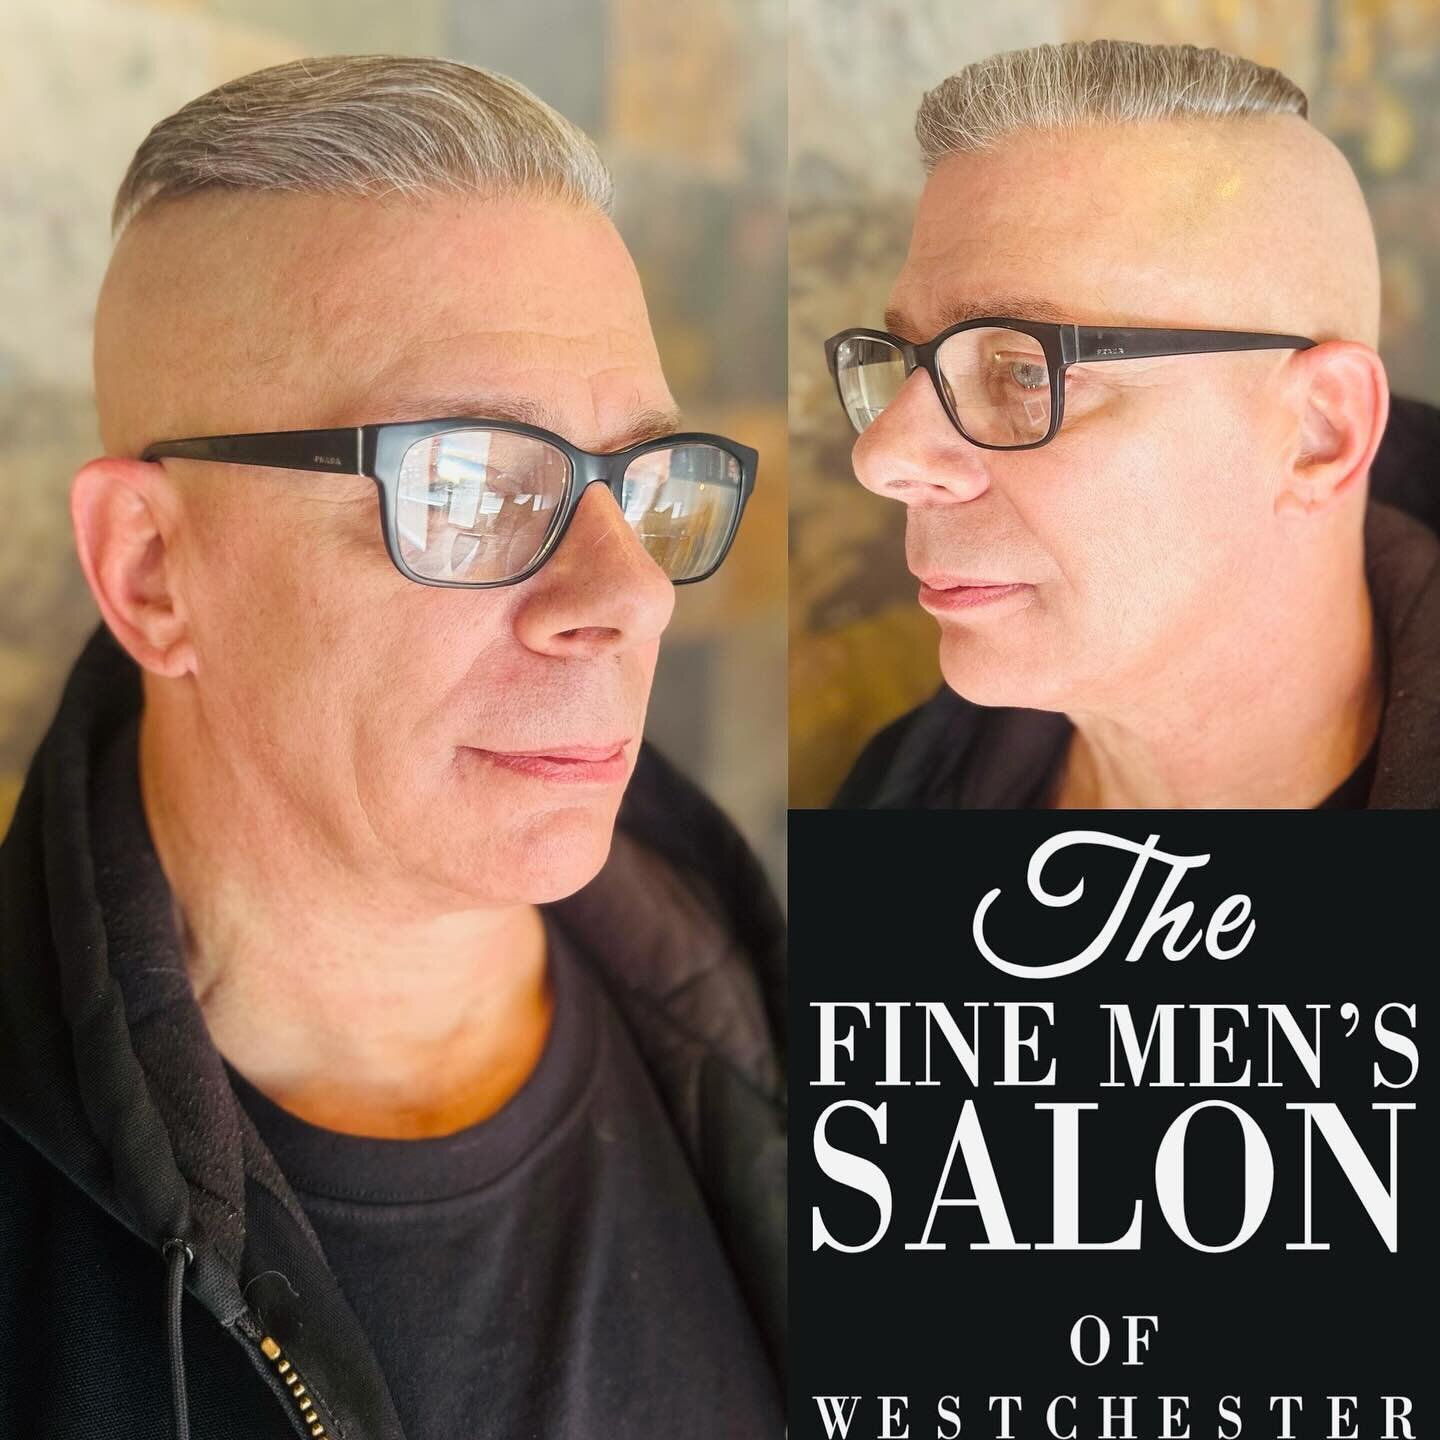 Courtesy is as much a mark of a gentleman as courage. Being well groomed is appreciated. 💪
✨Haircut and Style by Joe
✨Call 914-412-7755
✨Online reservations available at
Link in Bio  OR thefinemenssalon.com
✨Walk In are Always Welcome!
✨We Know Men&